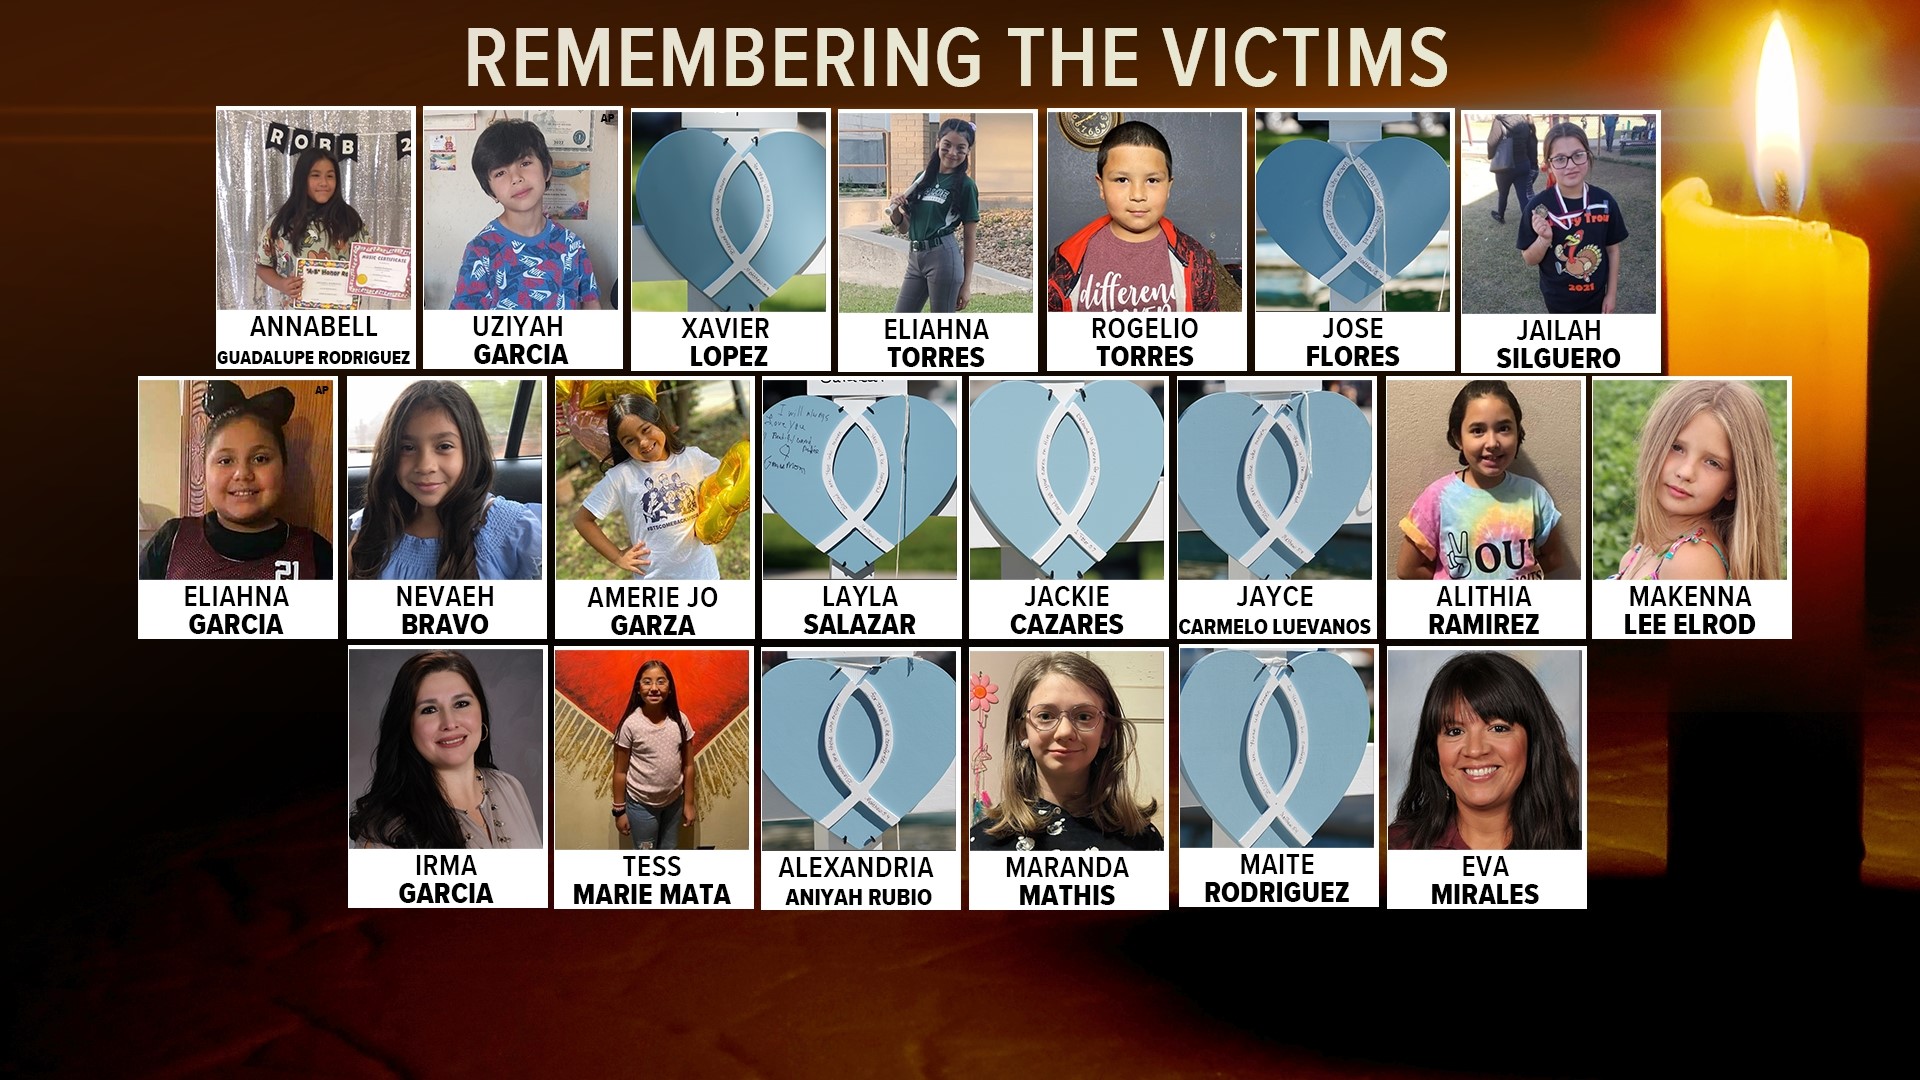 A tribute to remember the 21 victims who died in the mass shooting at Robb Elementary School in Uvalde, TX on May 24, 2022.